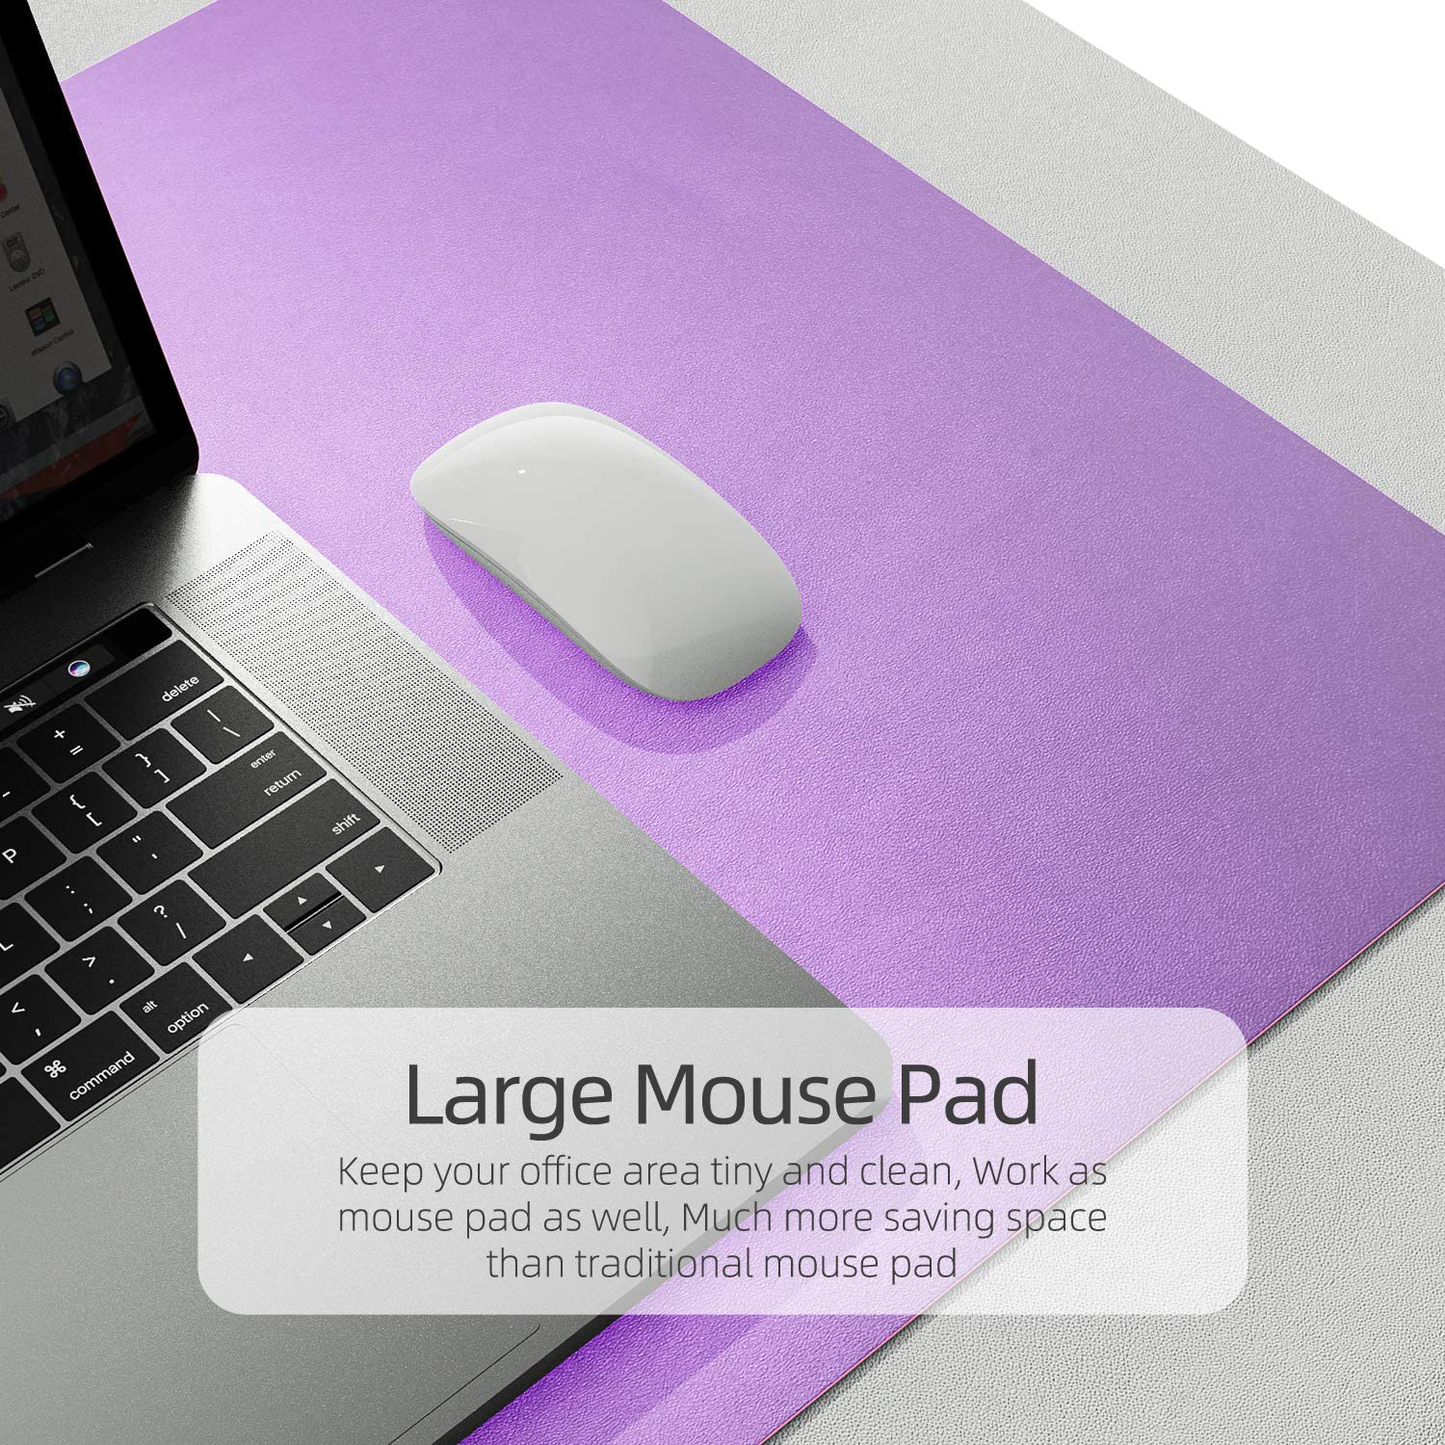 YSAGi Multifunctional Office Desk Pad, Ultra Thin Waterproof PU Leather Mouse Pad, Dual Use Desk Writing Mat for Office/Home (Dark Grey, 23.6" x 13.7")